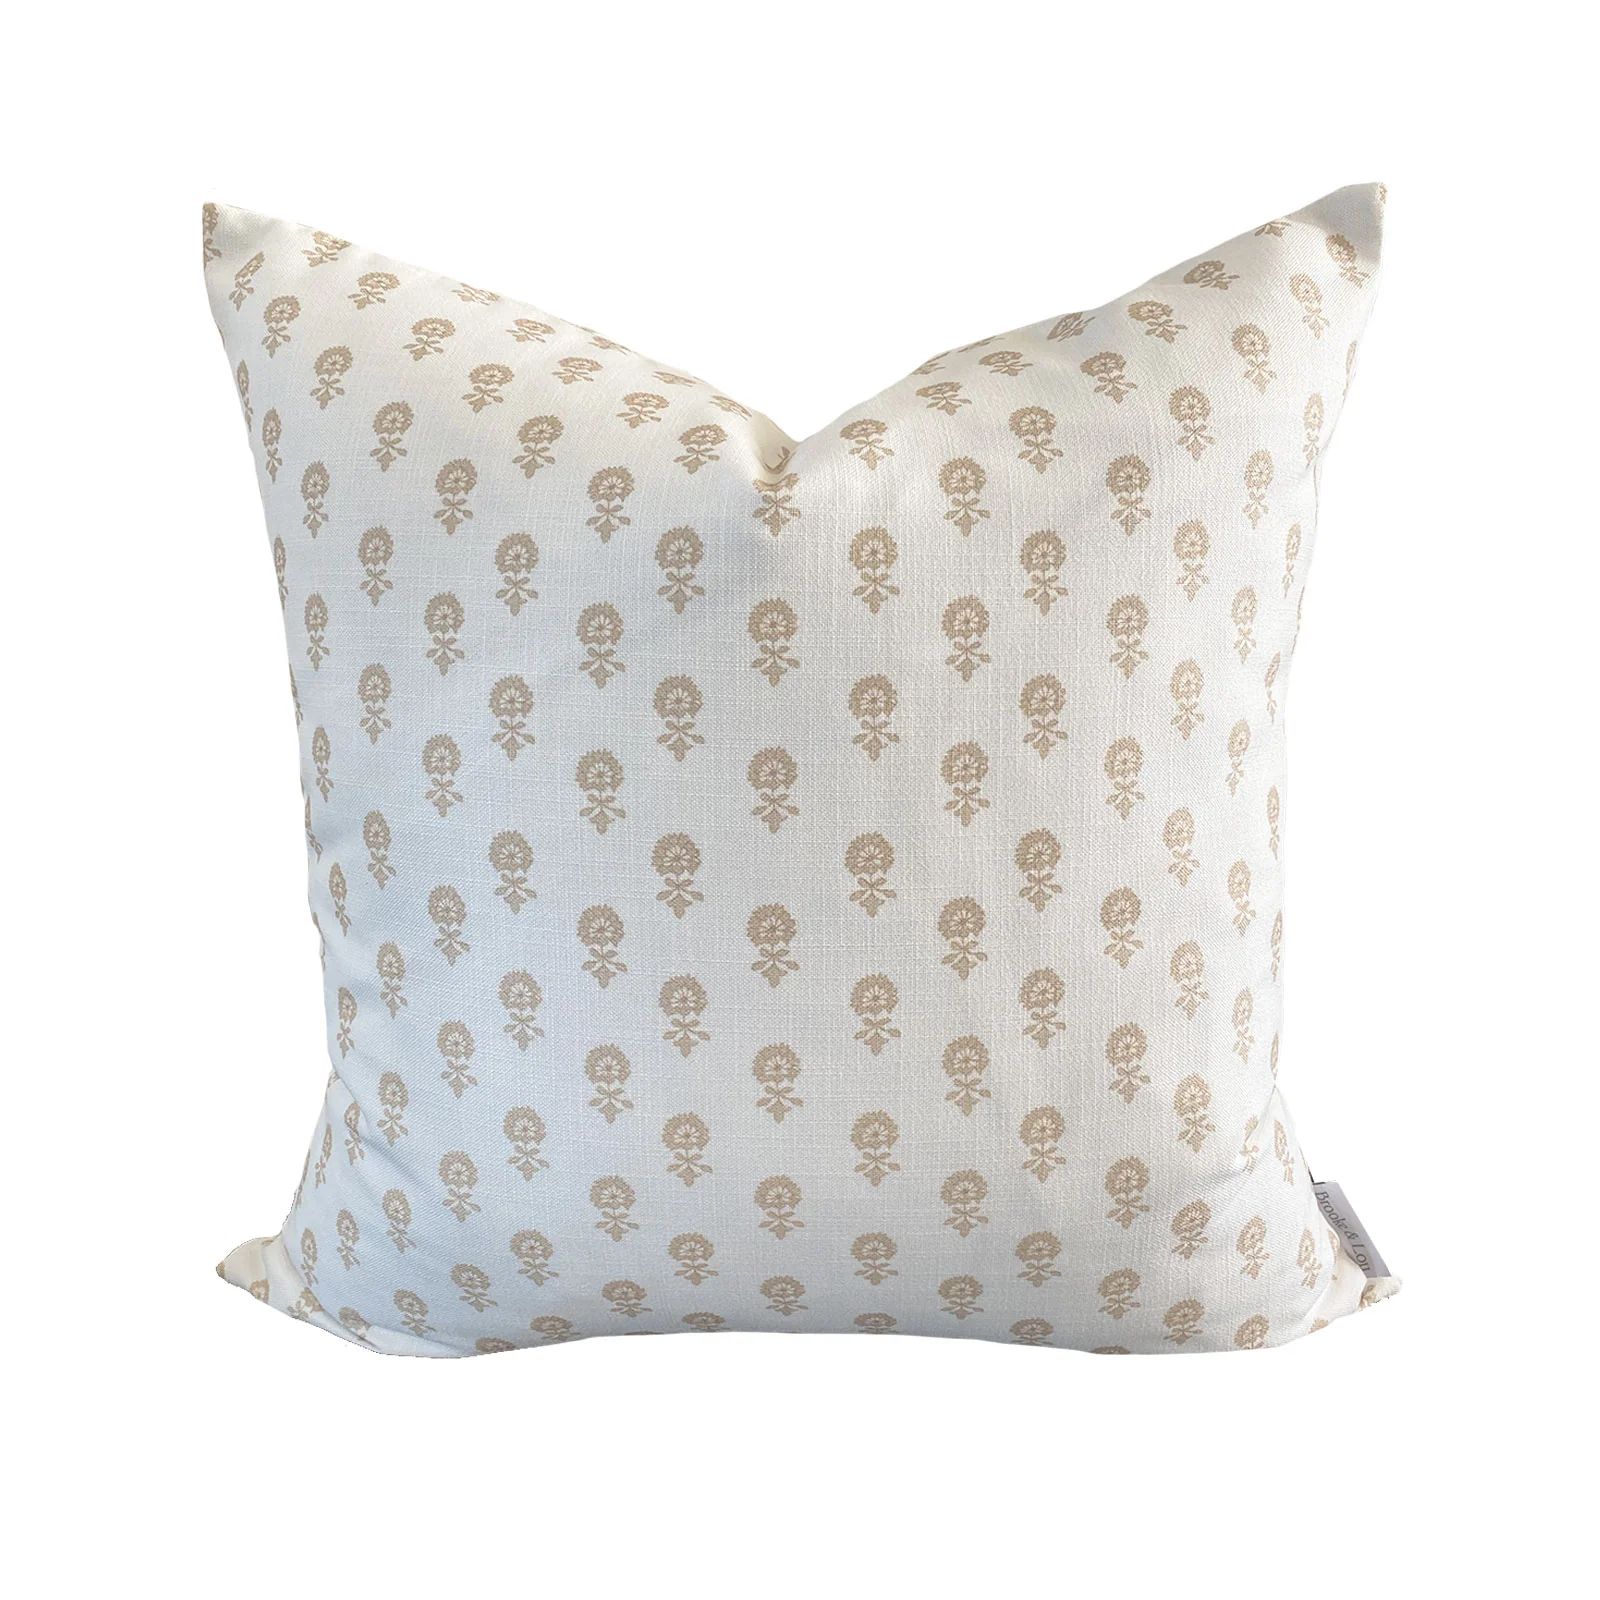 Lyla Pillow in Natural | Brooke and Lou